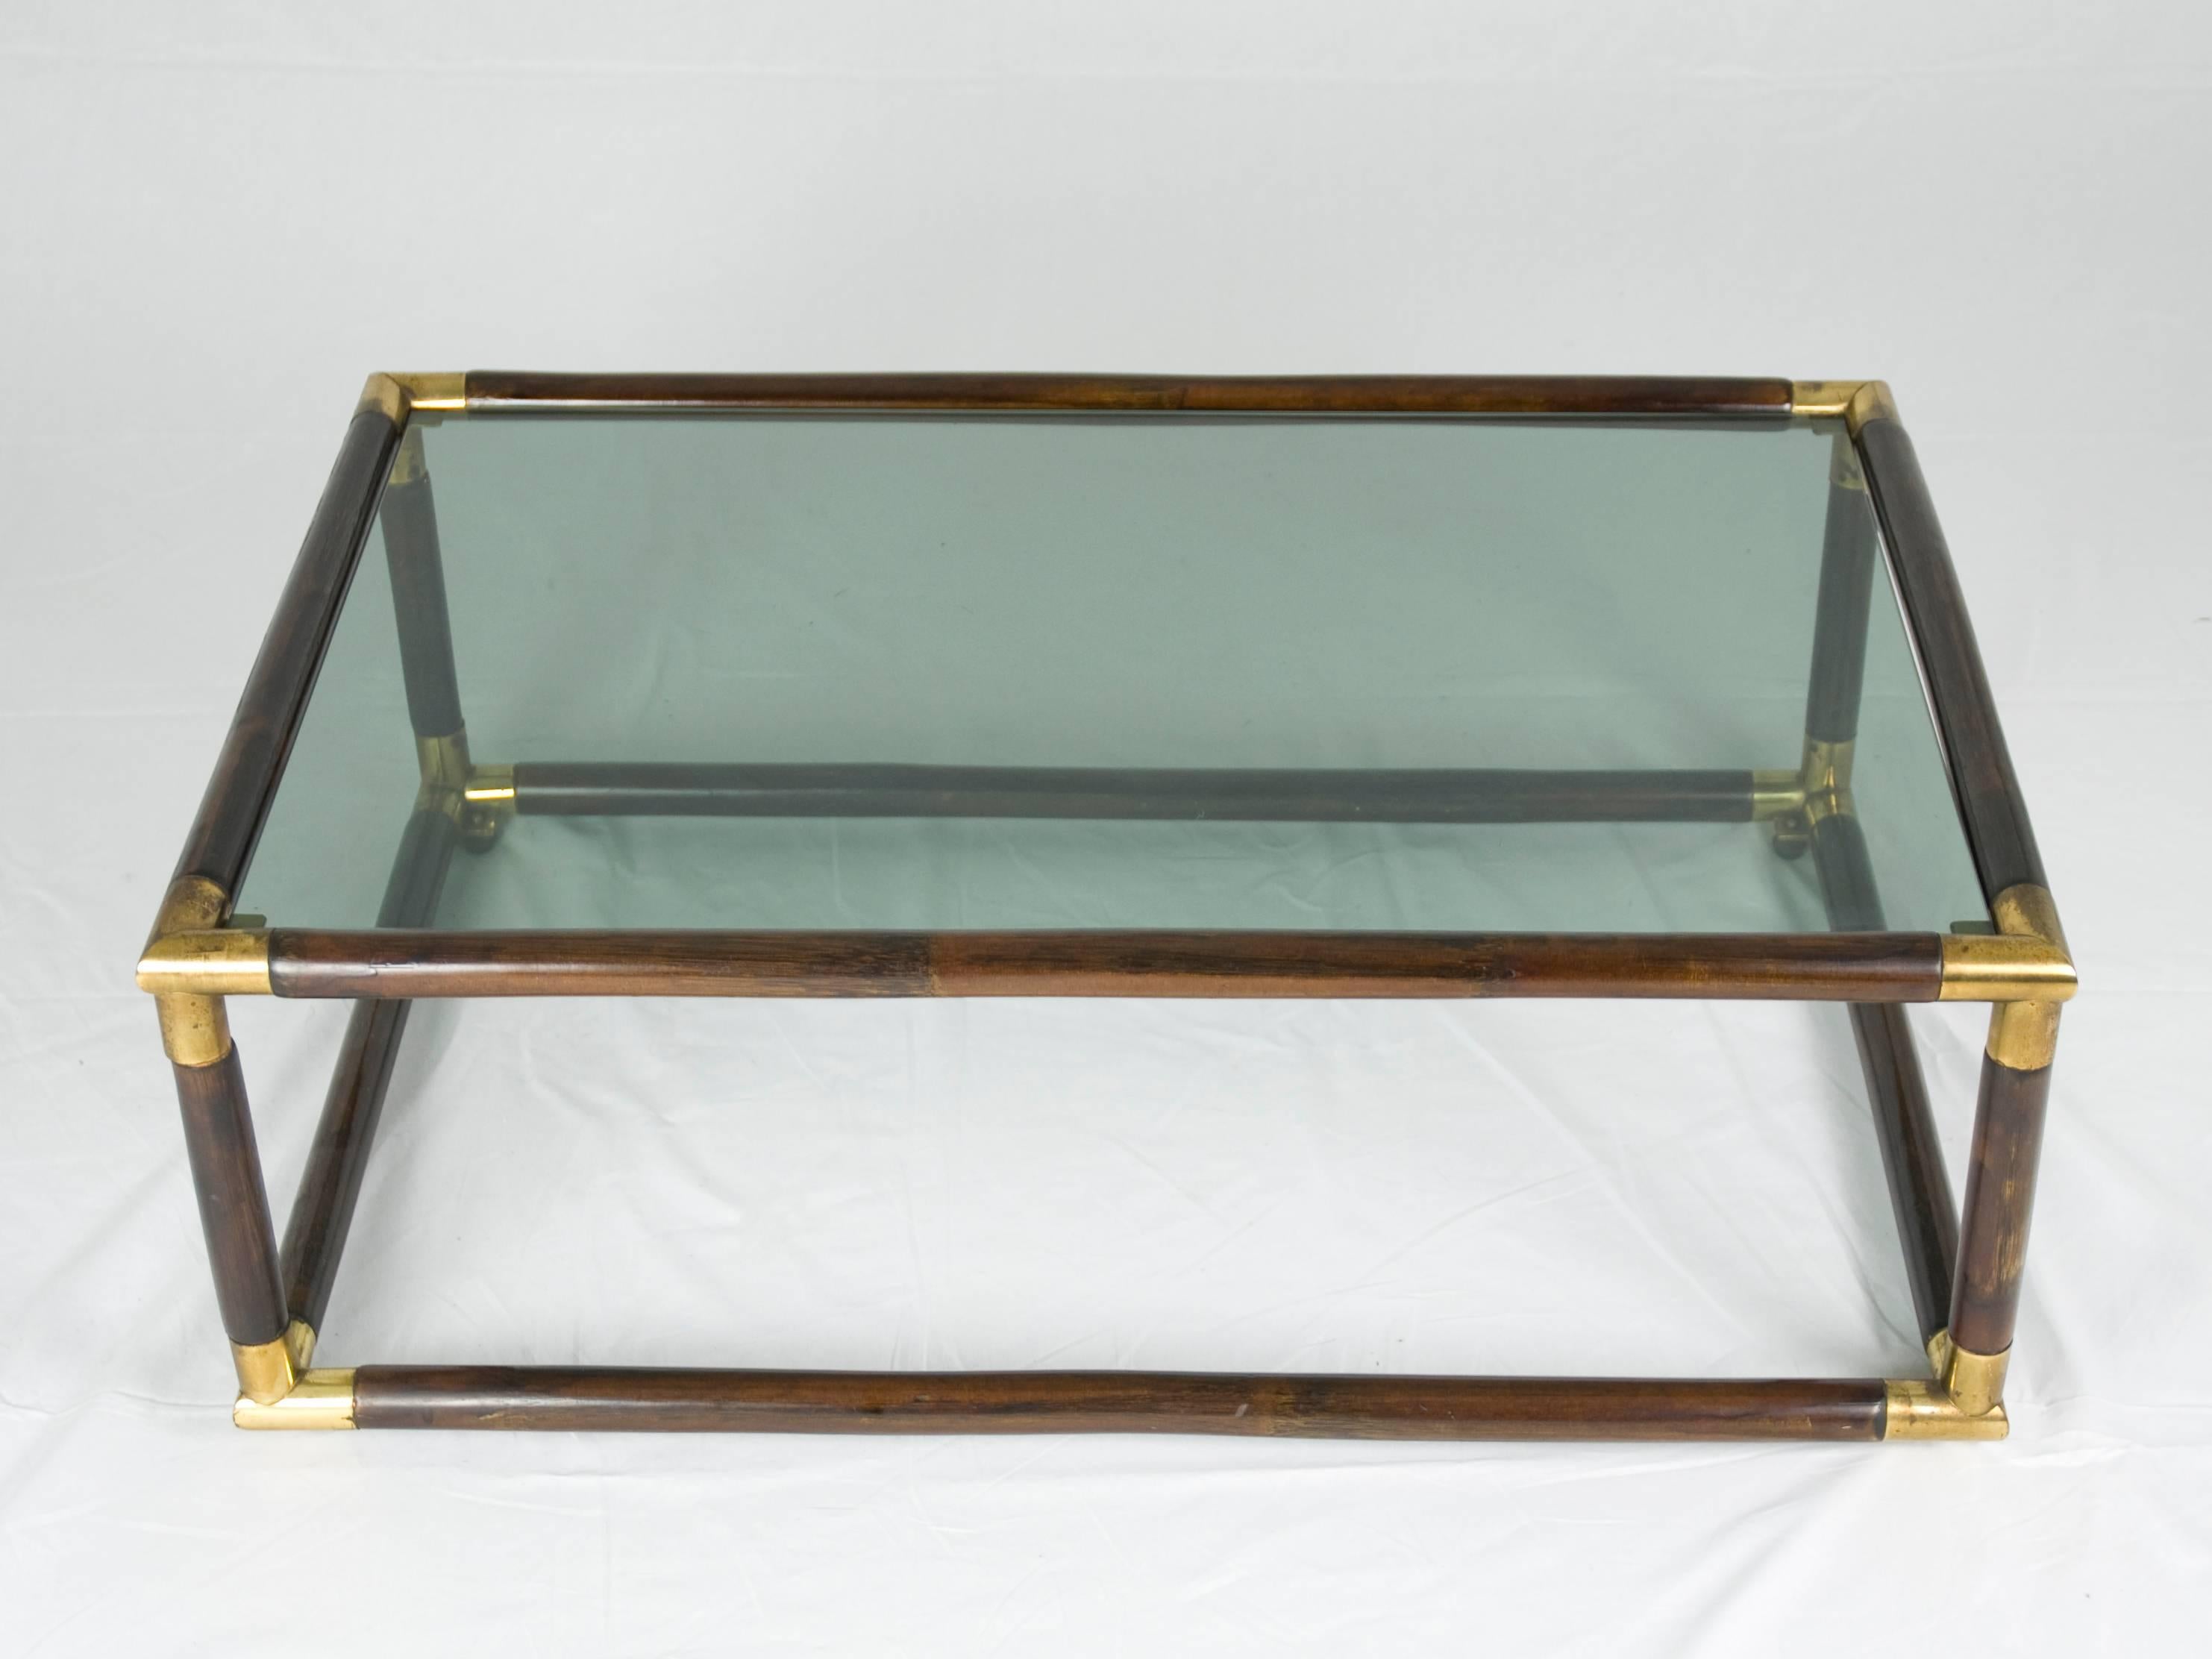 This elegant coffee table was produced in Italy around the 1970s. It is made from a laquered bamboo structure with brass junctions and features one smoked glass shelf.
The table remains in excellent vintage condition: a small chip on the edge of